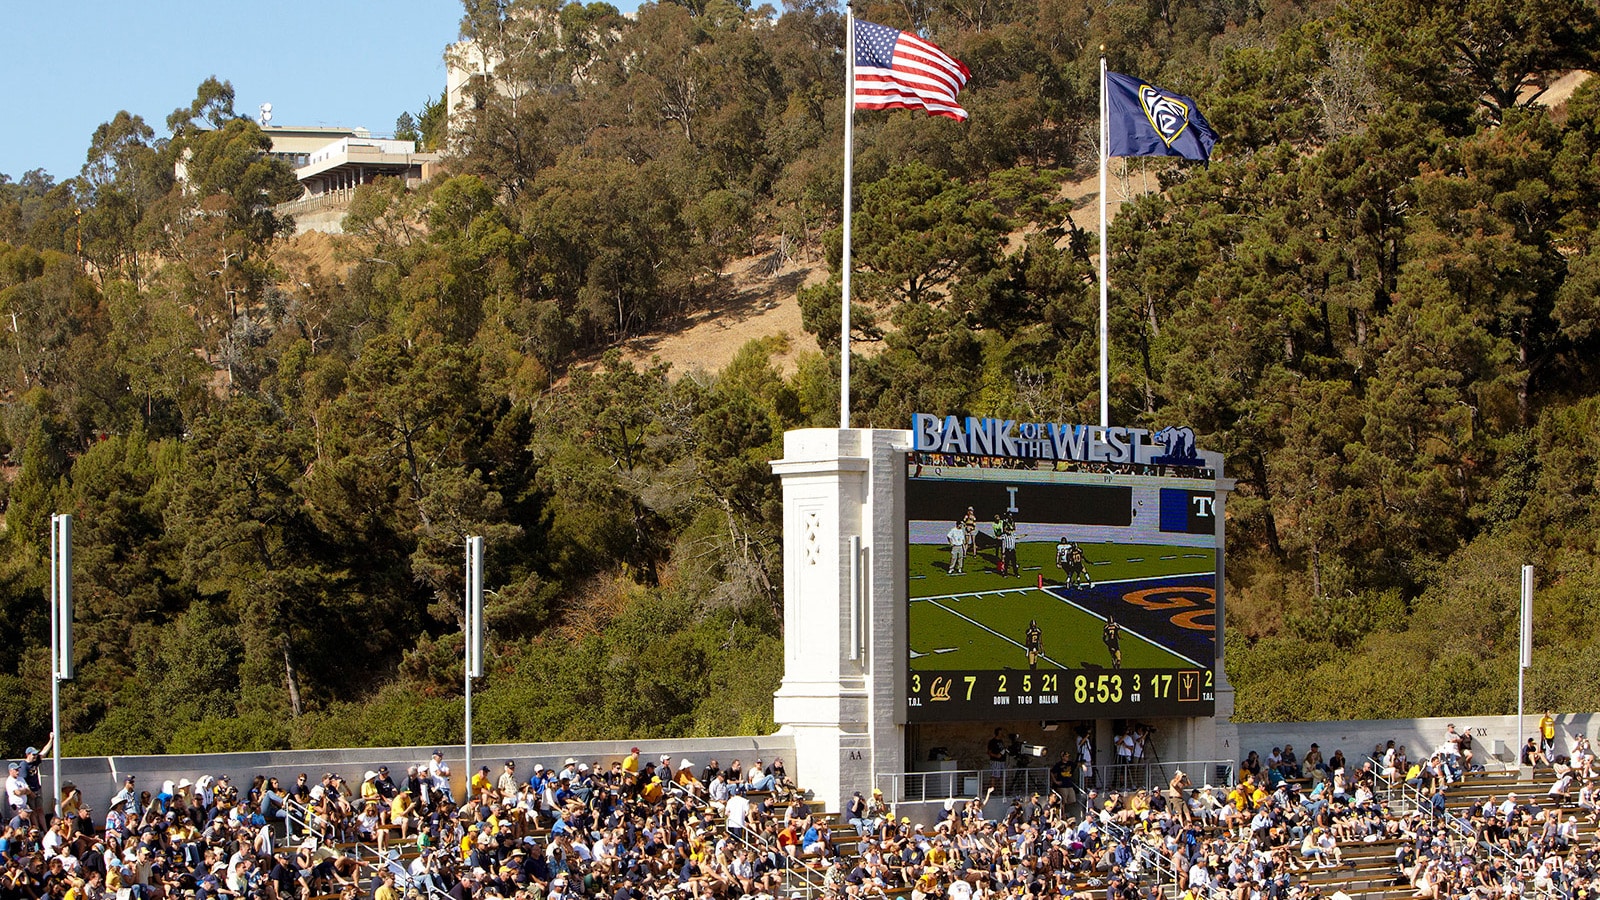 Meyer Sound CAL Provides Clarity Above the Crowd at Berkeley's Memorial Stadium